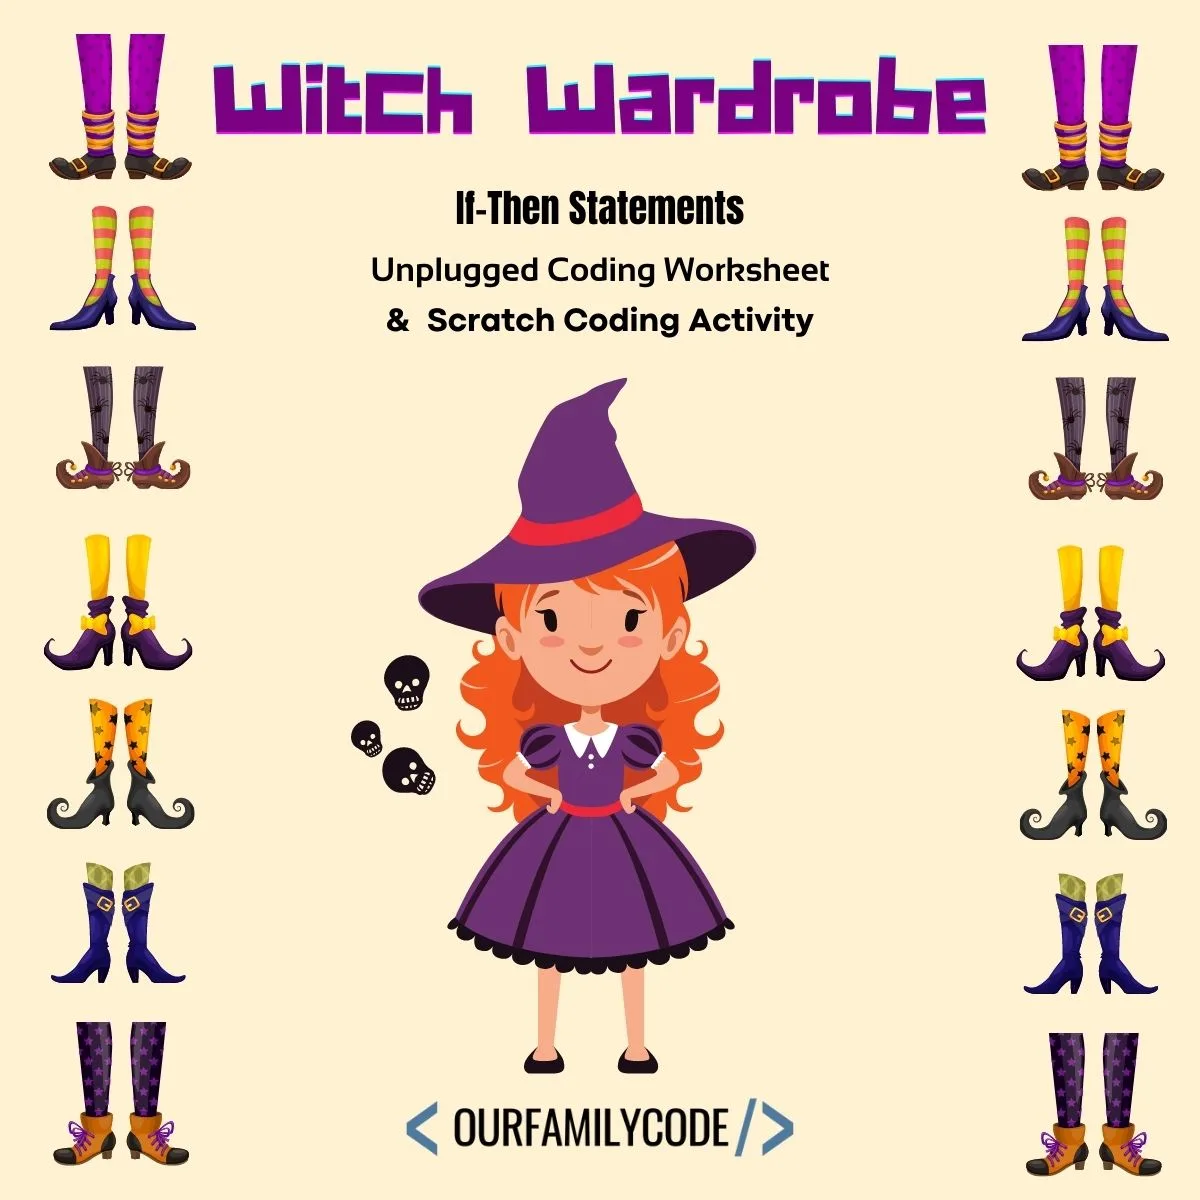 A picture of a friendly witch with seven different pairs of socks and shoes on a tan background with the text "Witch Wardrobe If-Then Statements Unplugged Coding Worksheet & Scratch Coding Activity" at the top.